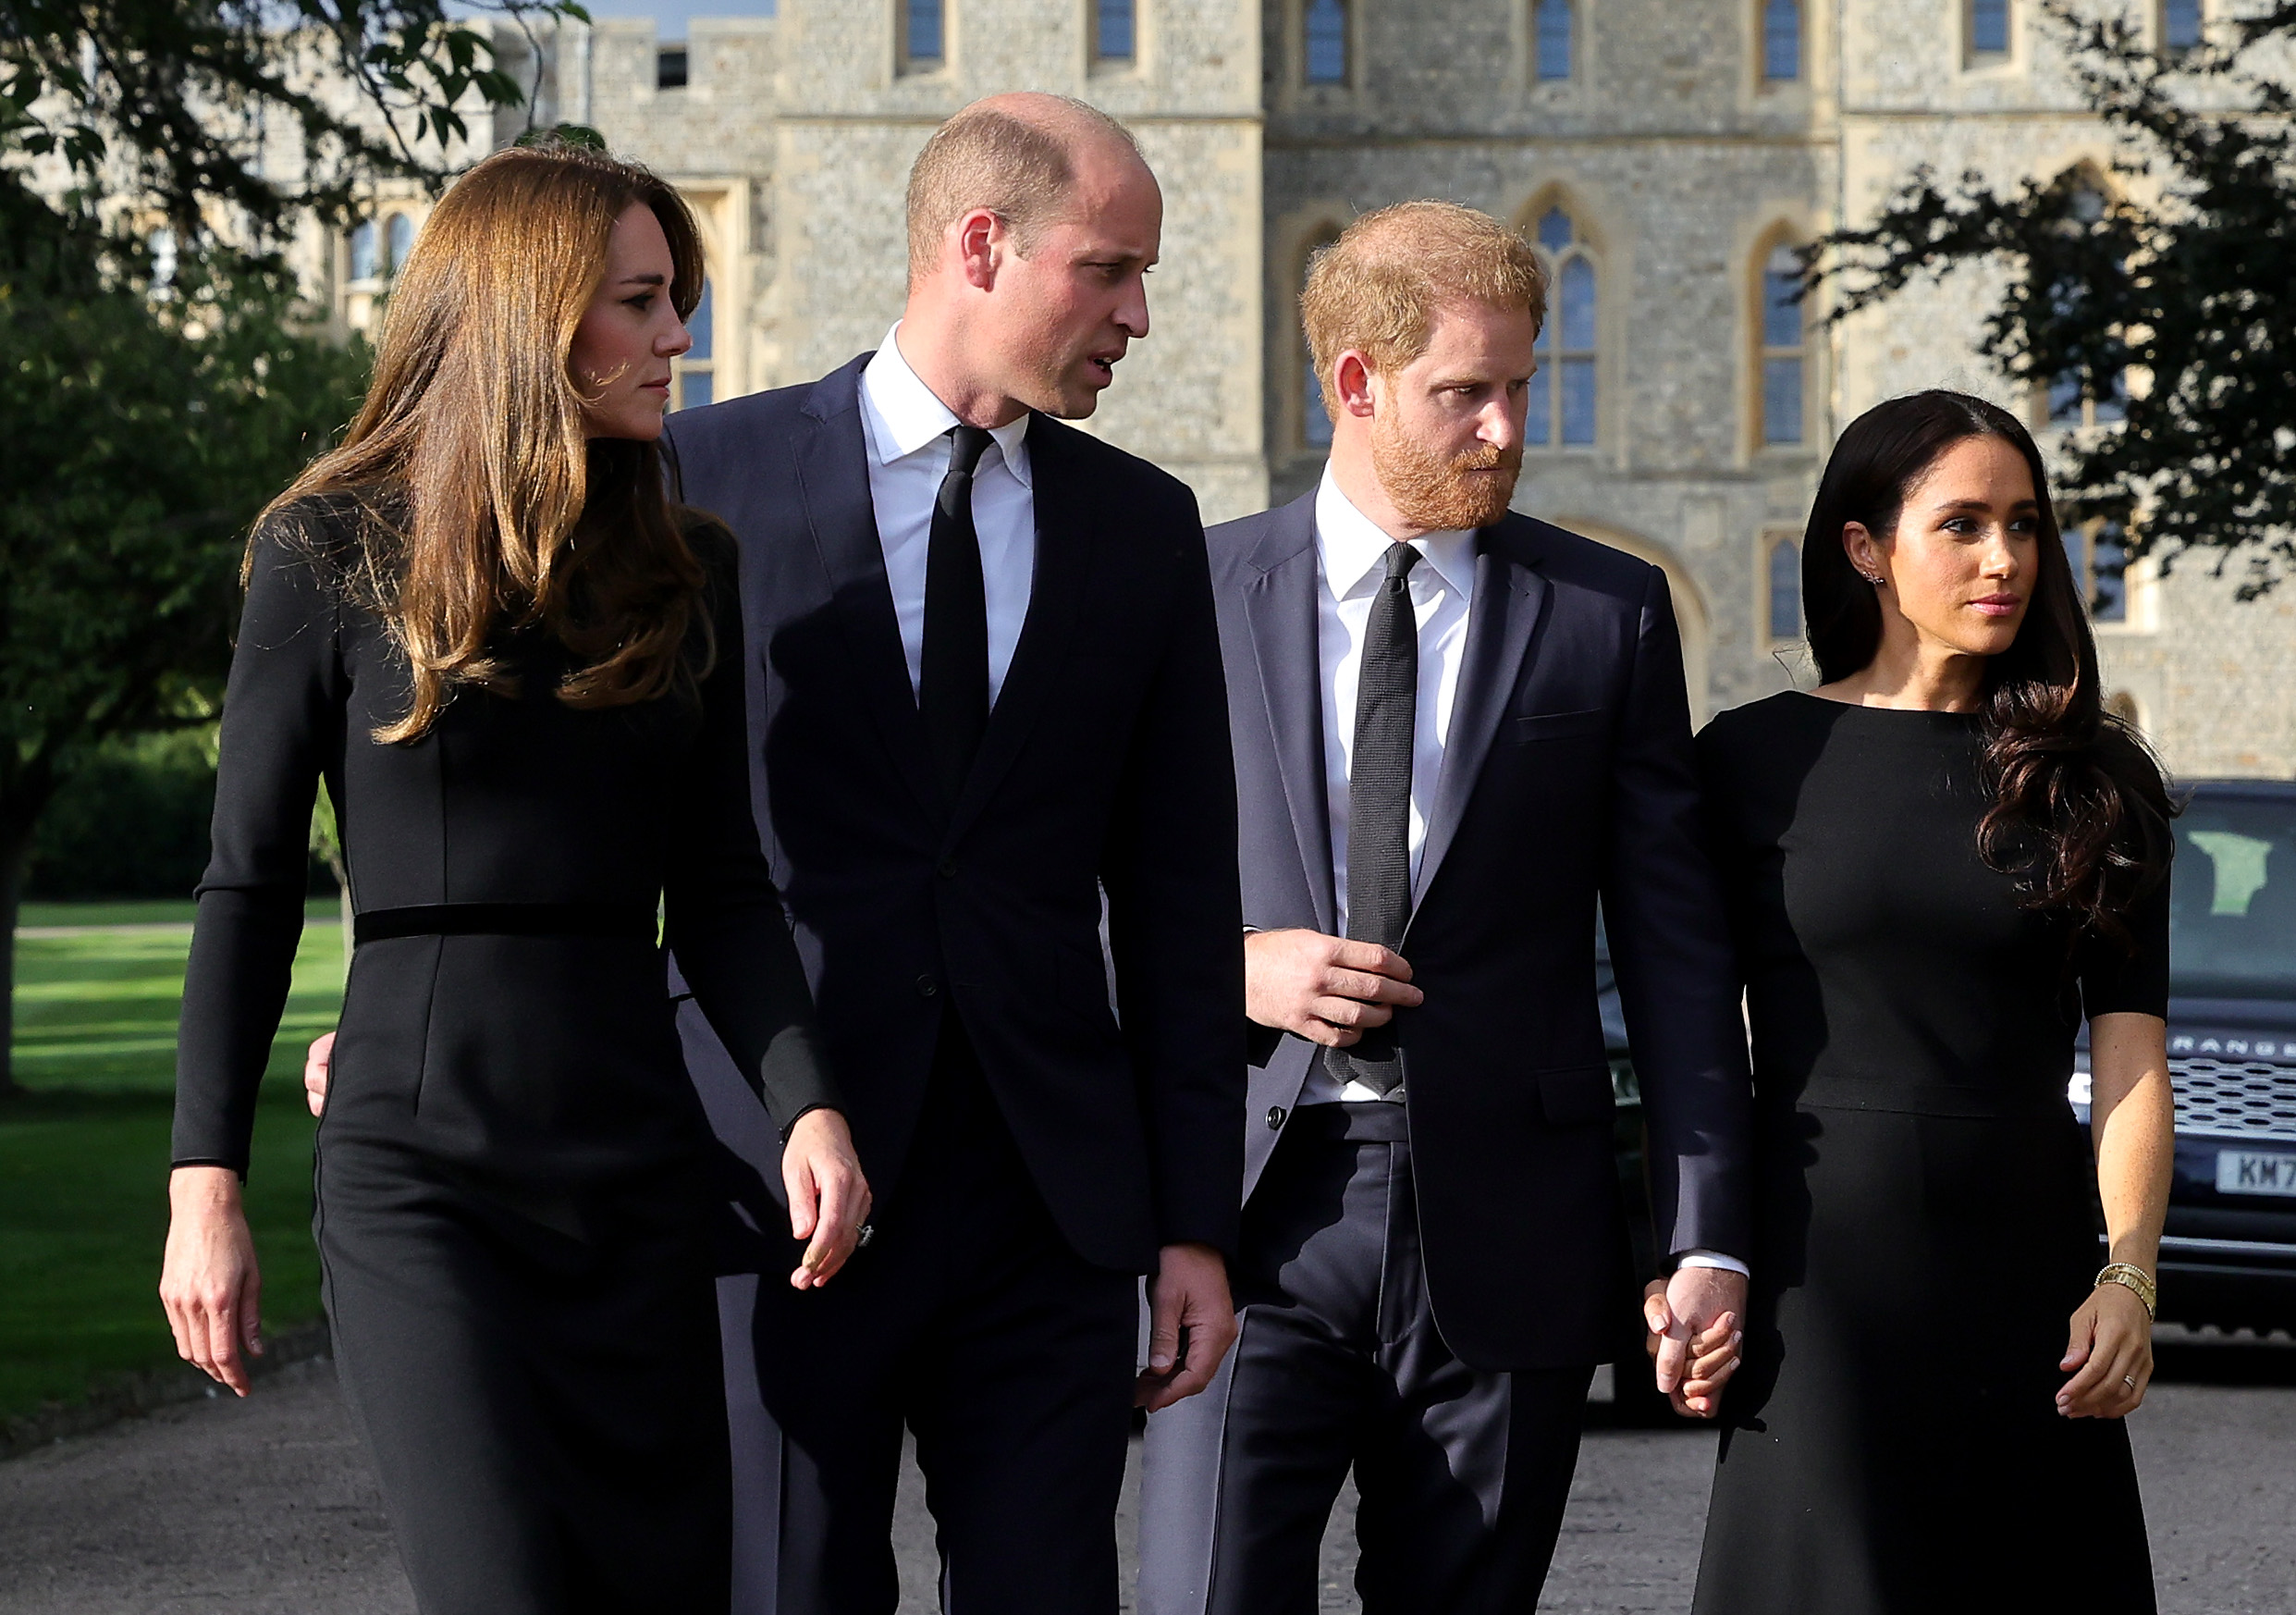 Kate Middleton, Prince William, Prince Harry, and Meghan Markle arrive to view flowers and tributes to HM Queen Elizabeth on September 10, 2022 in Windsor, England. | Source: Getty Images